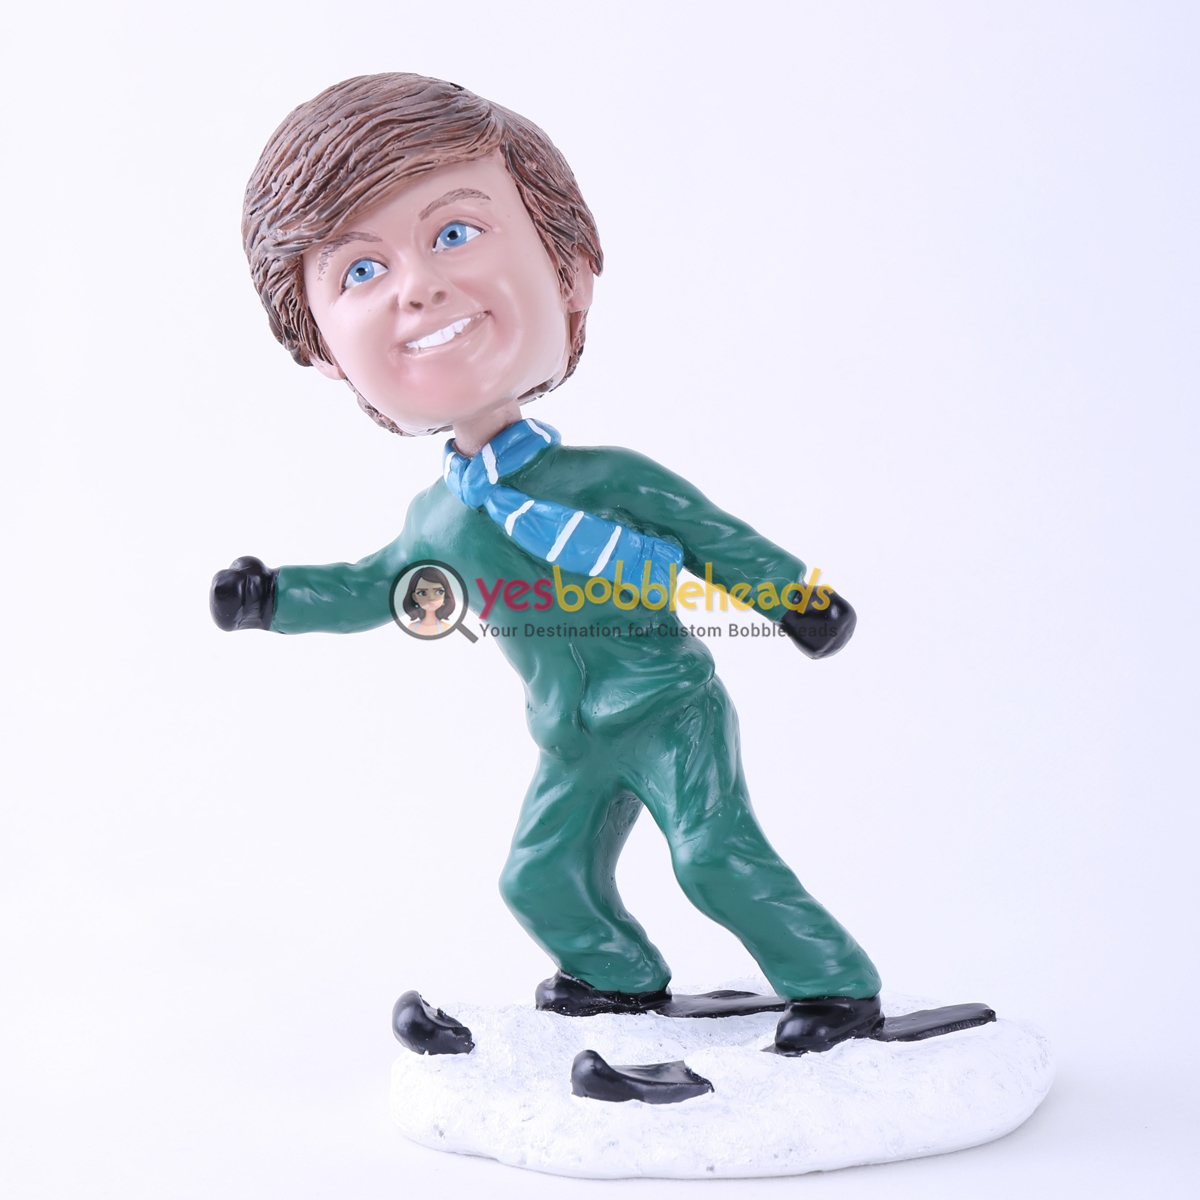 Picture of Custom Bobblehead Doll: Skiing Man